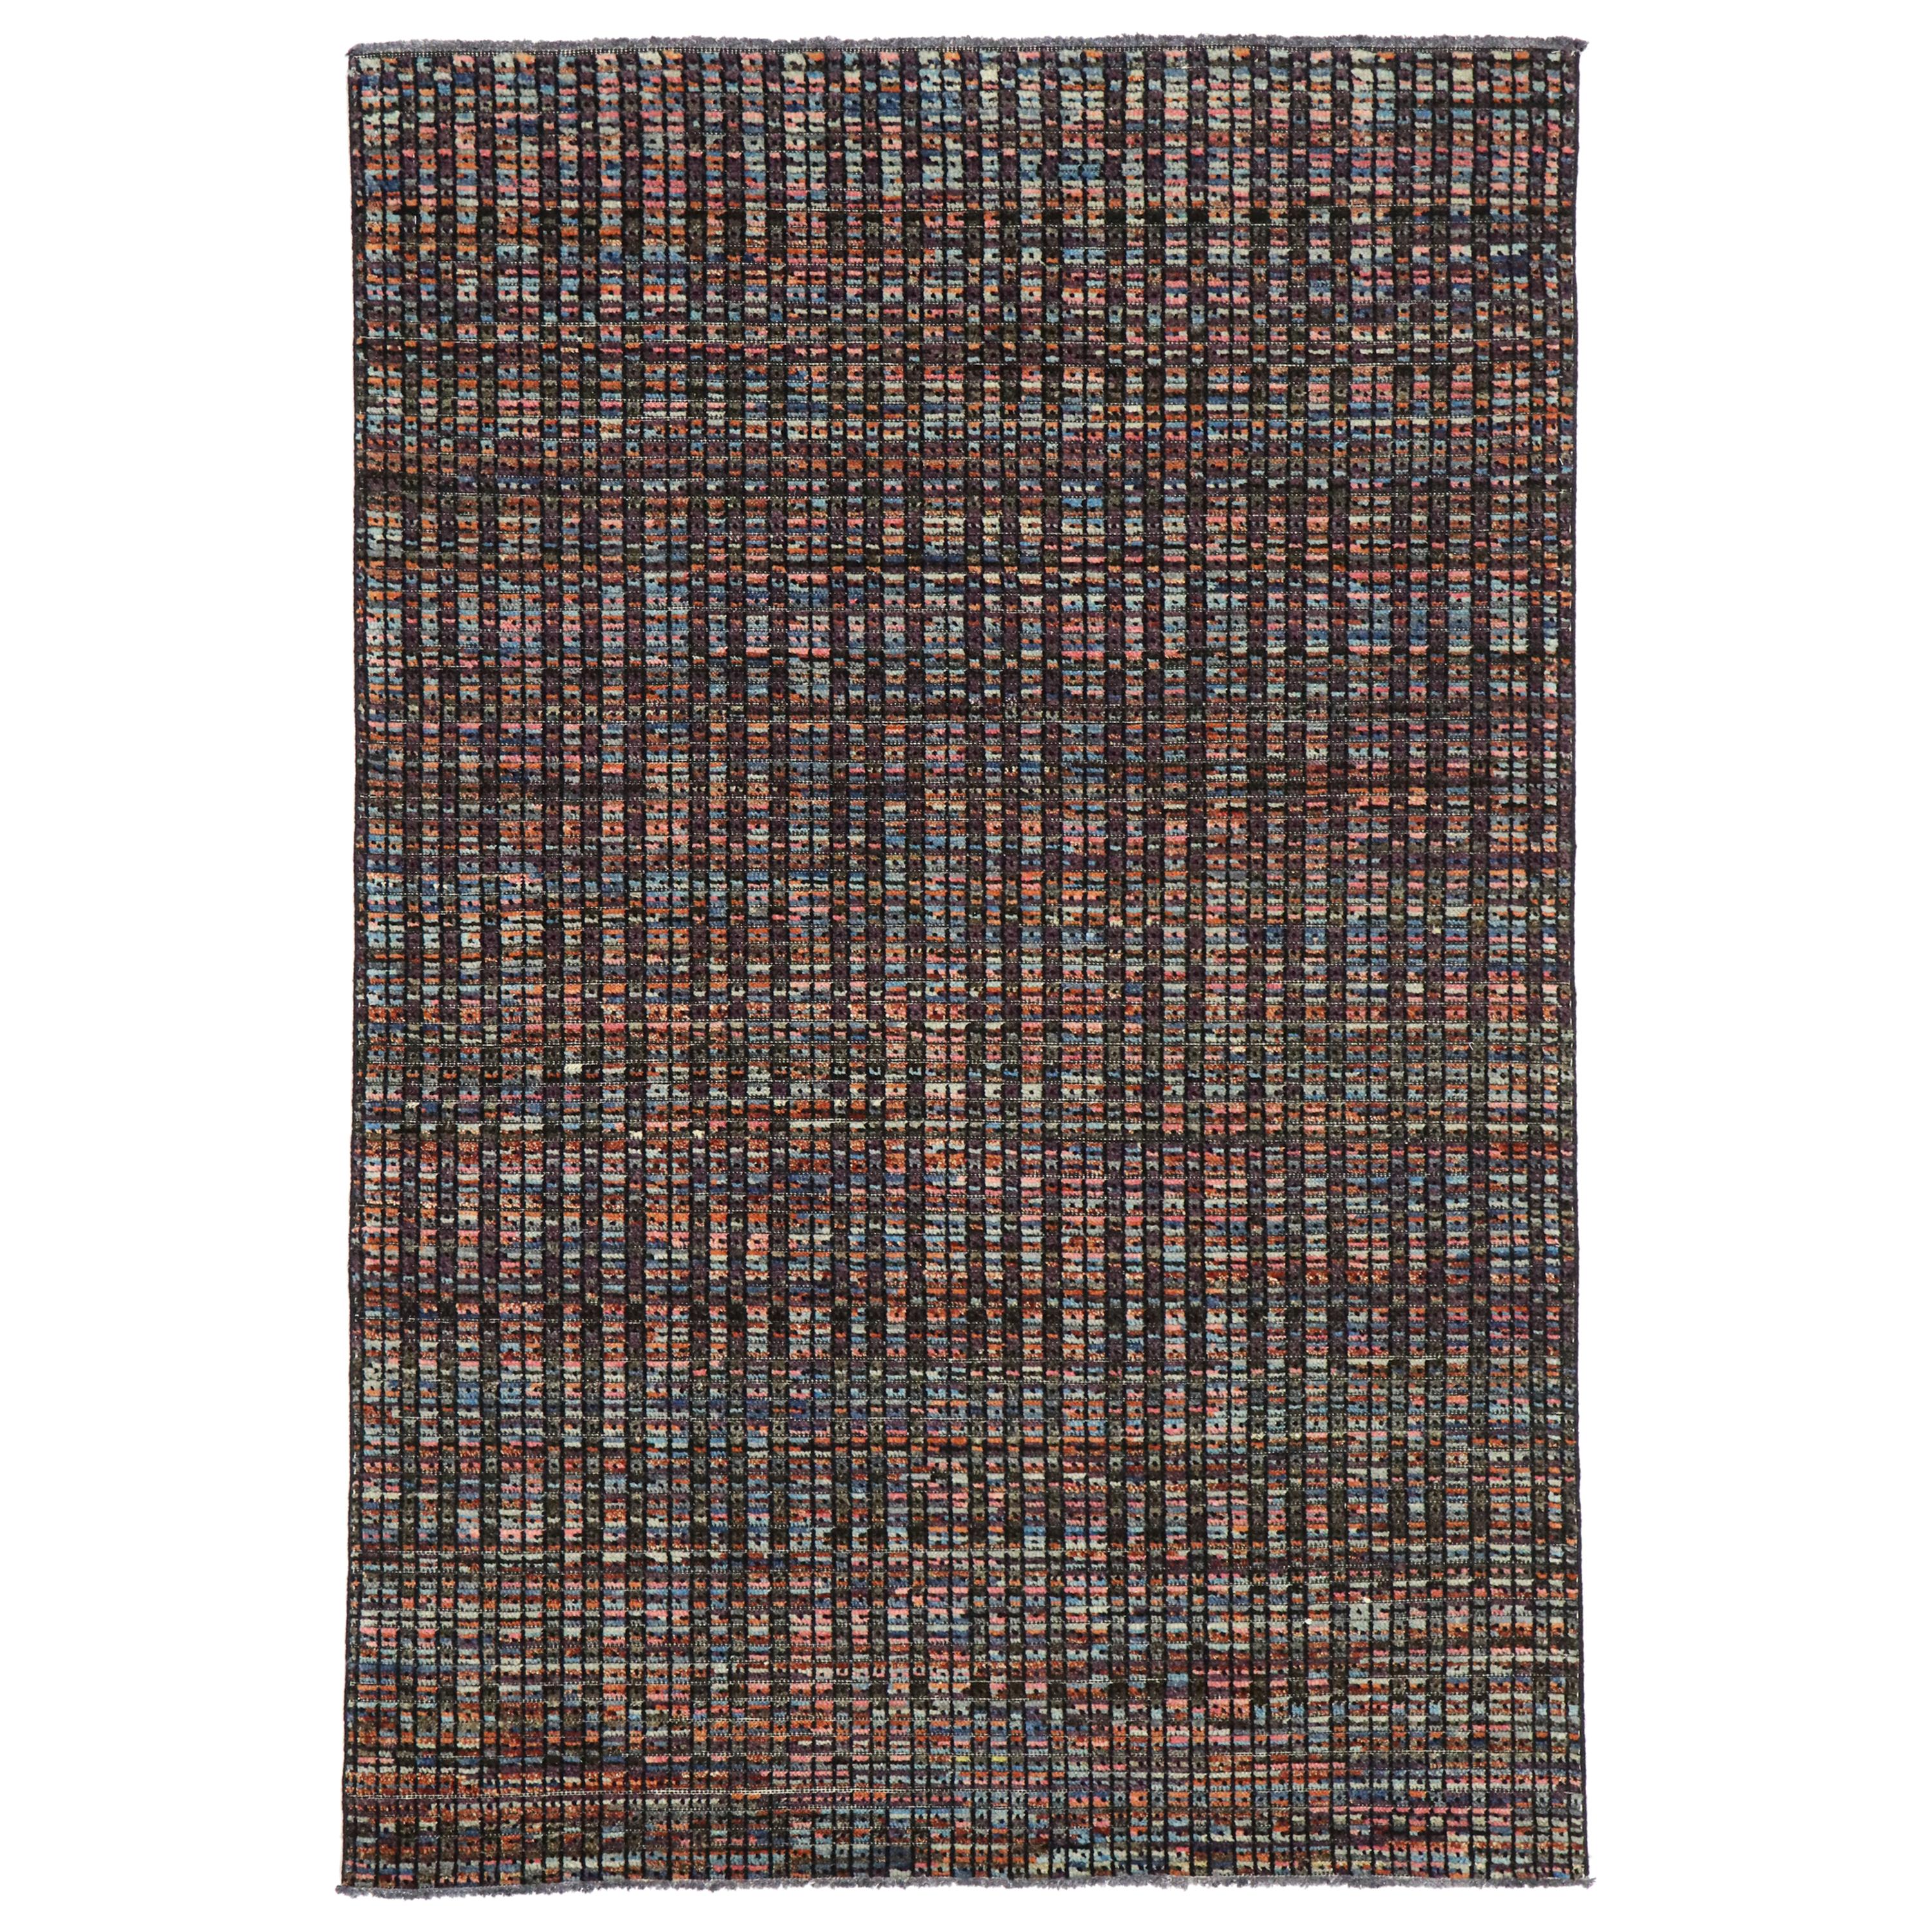 Contemporary Moroccan Rug with Modern American Colonial Style